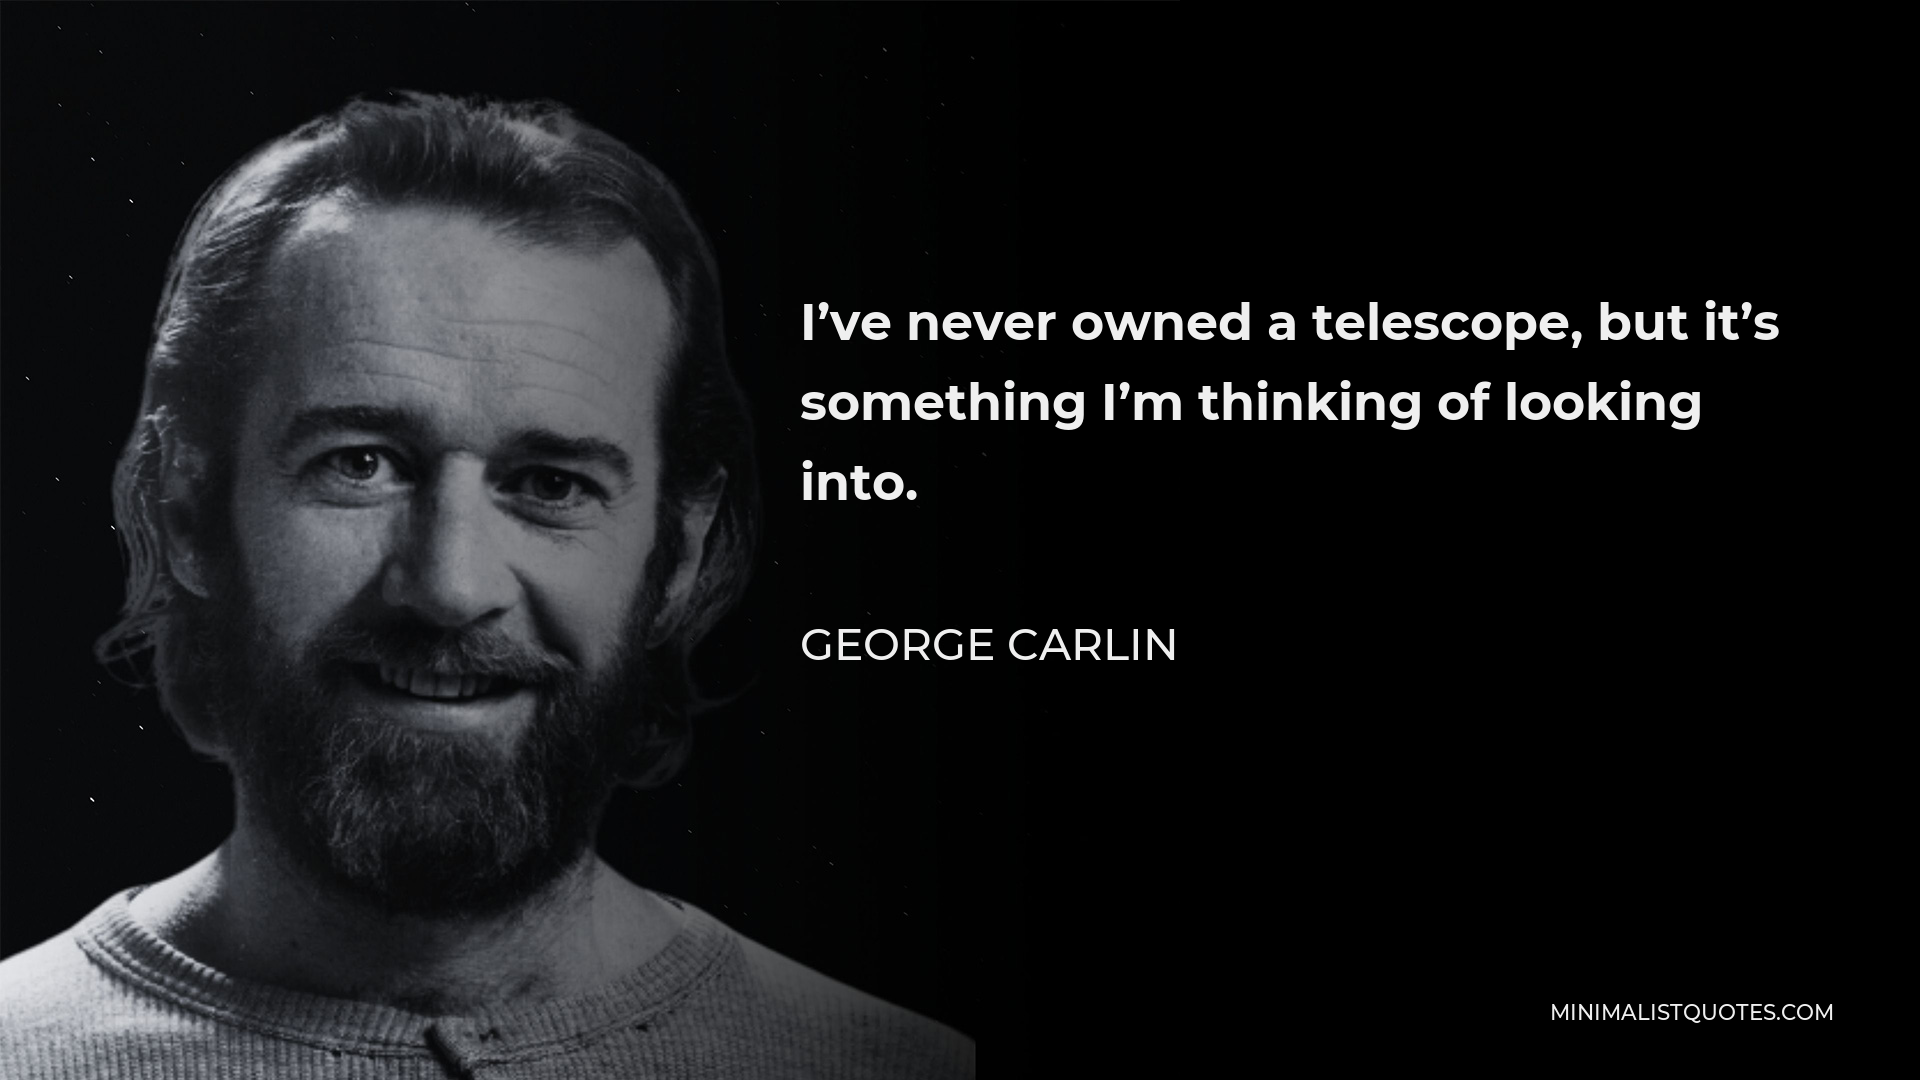 George Carlin Quote - I’ve never owned a telescope, but it’s something I’m thinking of looking into.